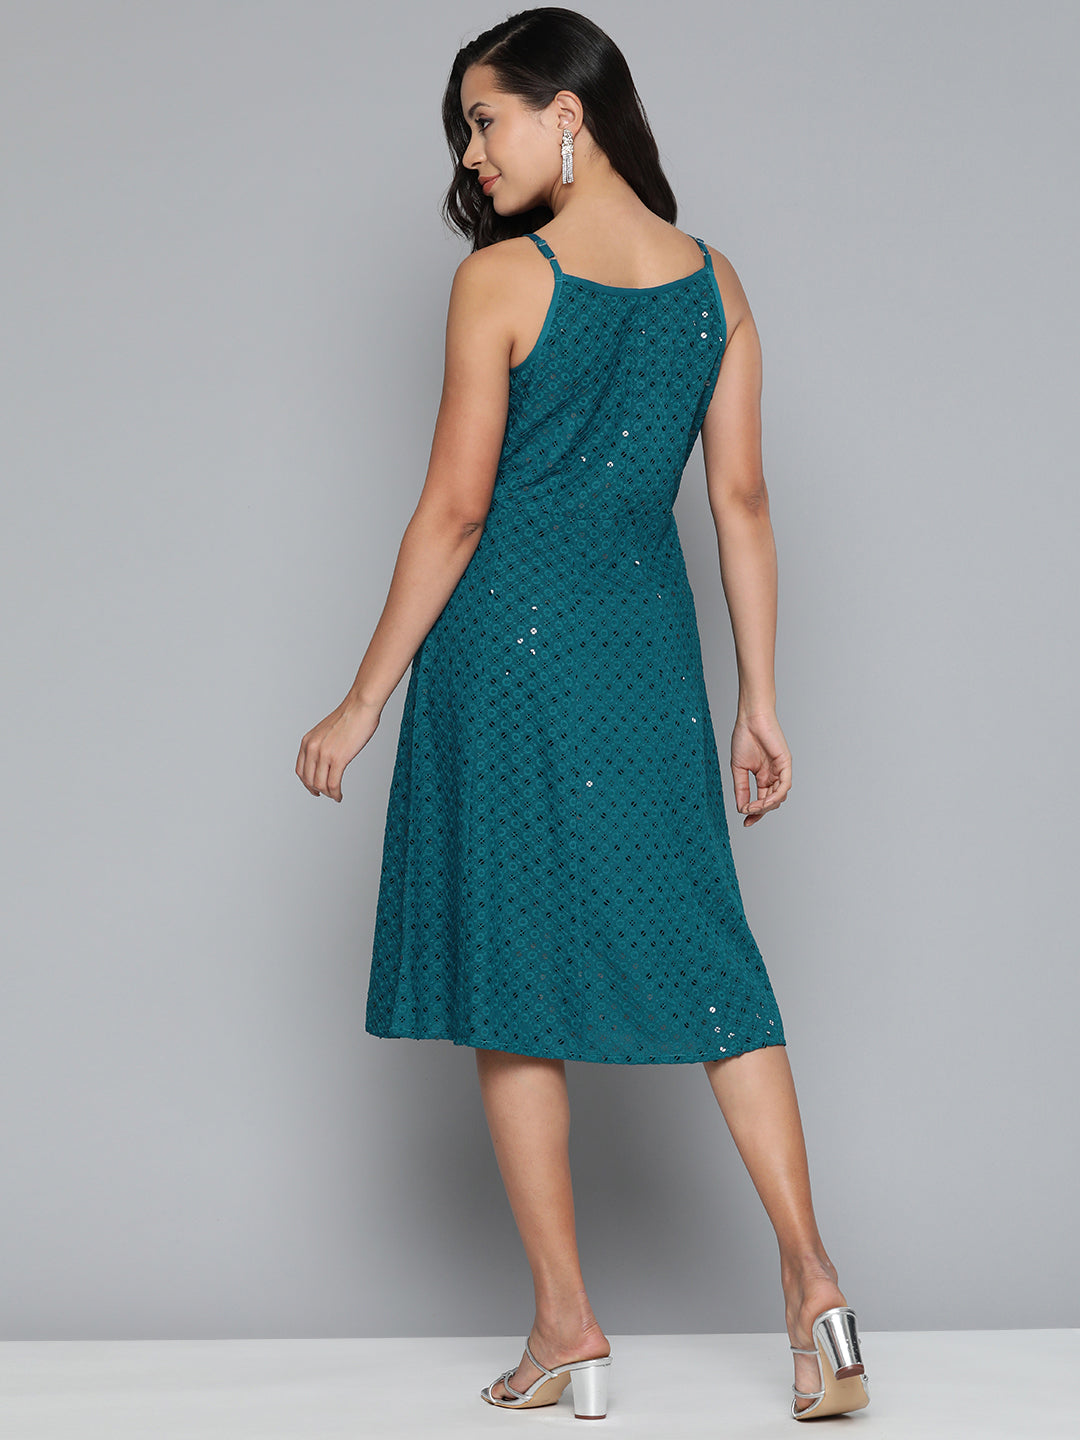 Jompers Blue Floral Sequin Embroidered A-Line Midi Dress ( JOK 1494 Peacock )